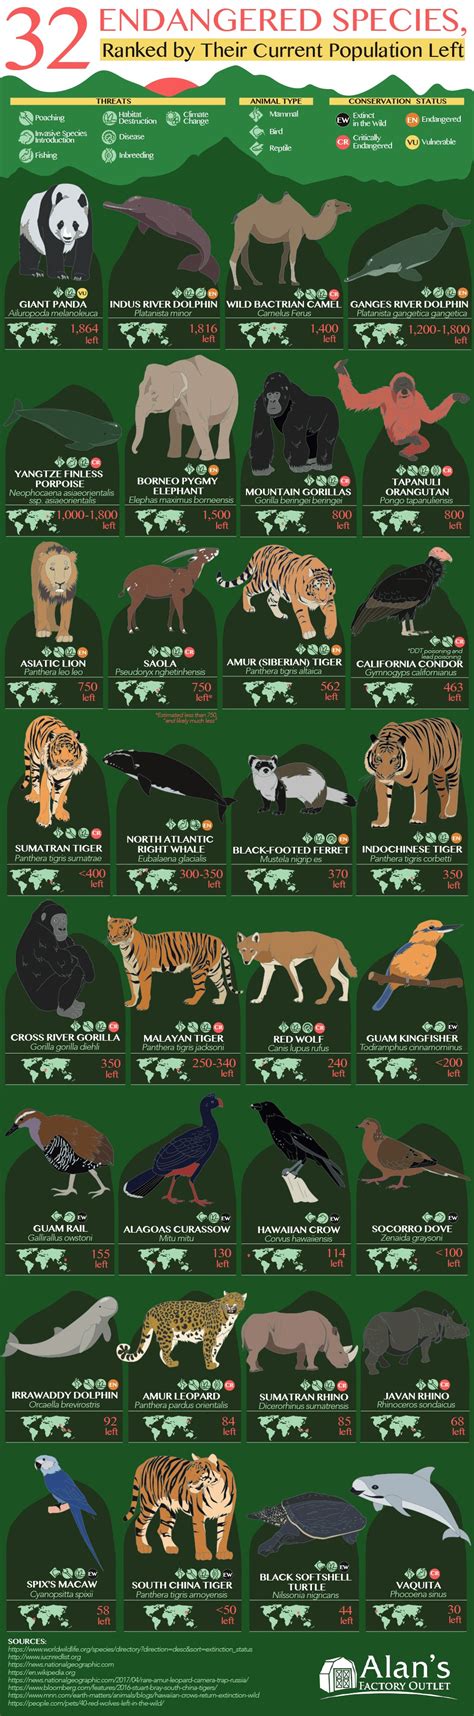 Infographic On 32 Endangered Species Ranked By Their Current Population